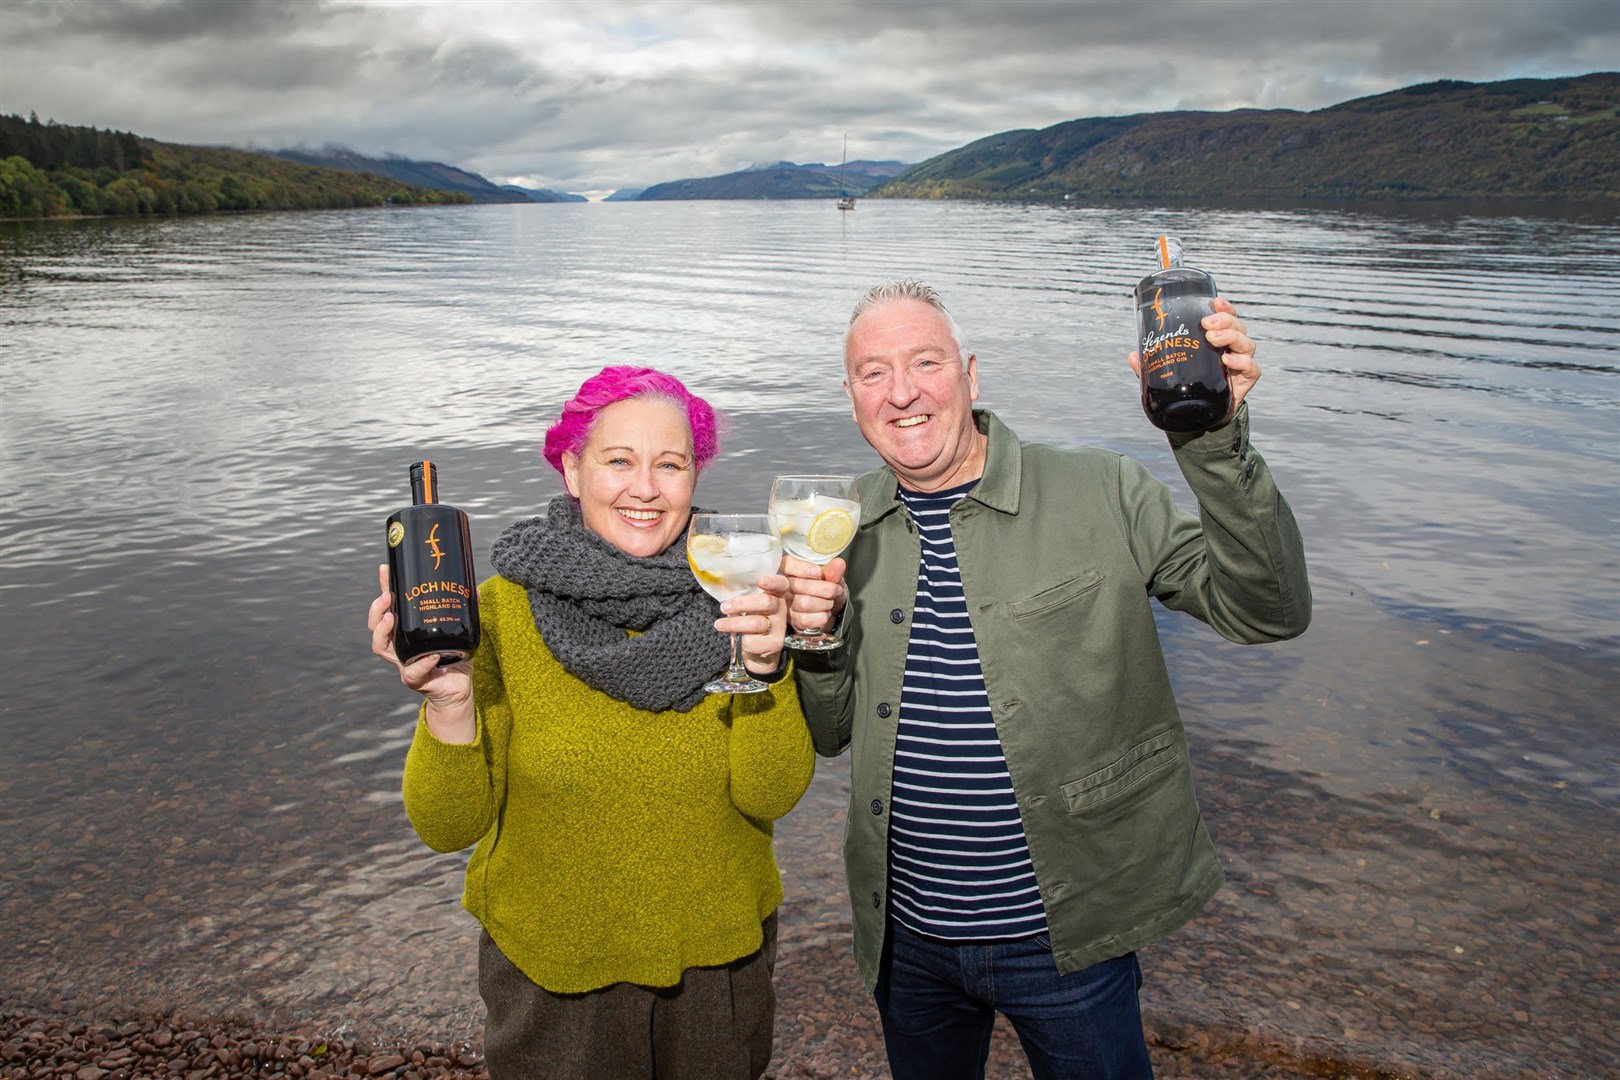 Kevin and Lorien Cameron-Ross, owners and founders of Loch Ness Spirits, are among the local makers and businesses featuring in the XpoNorth advent calendar.